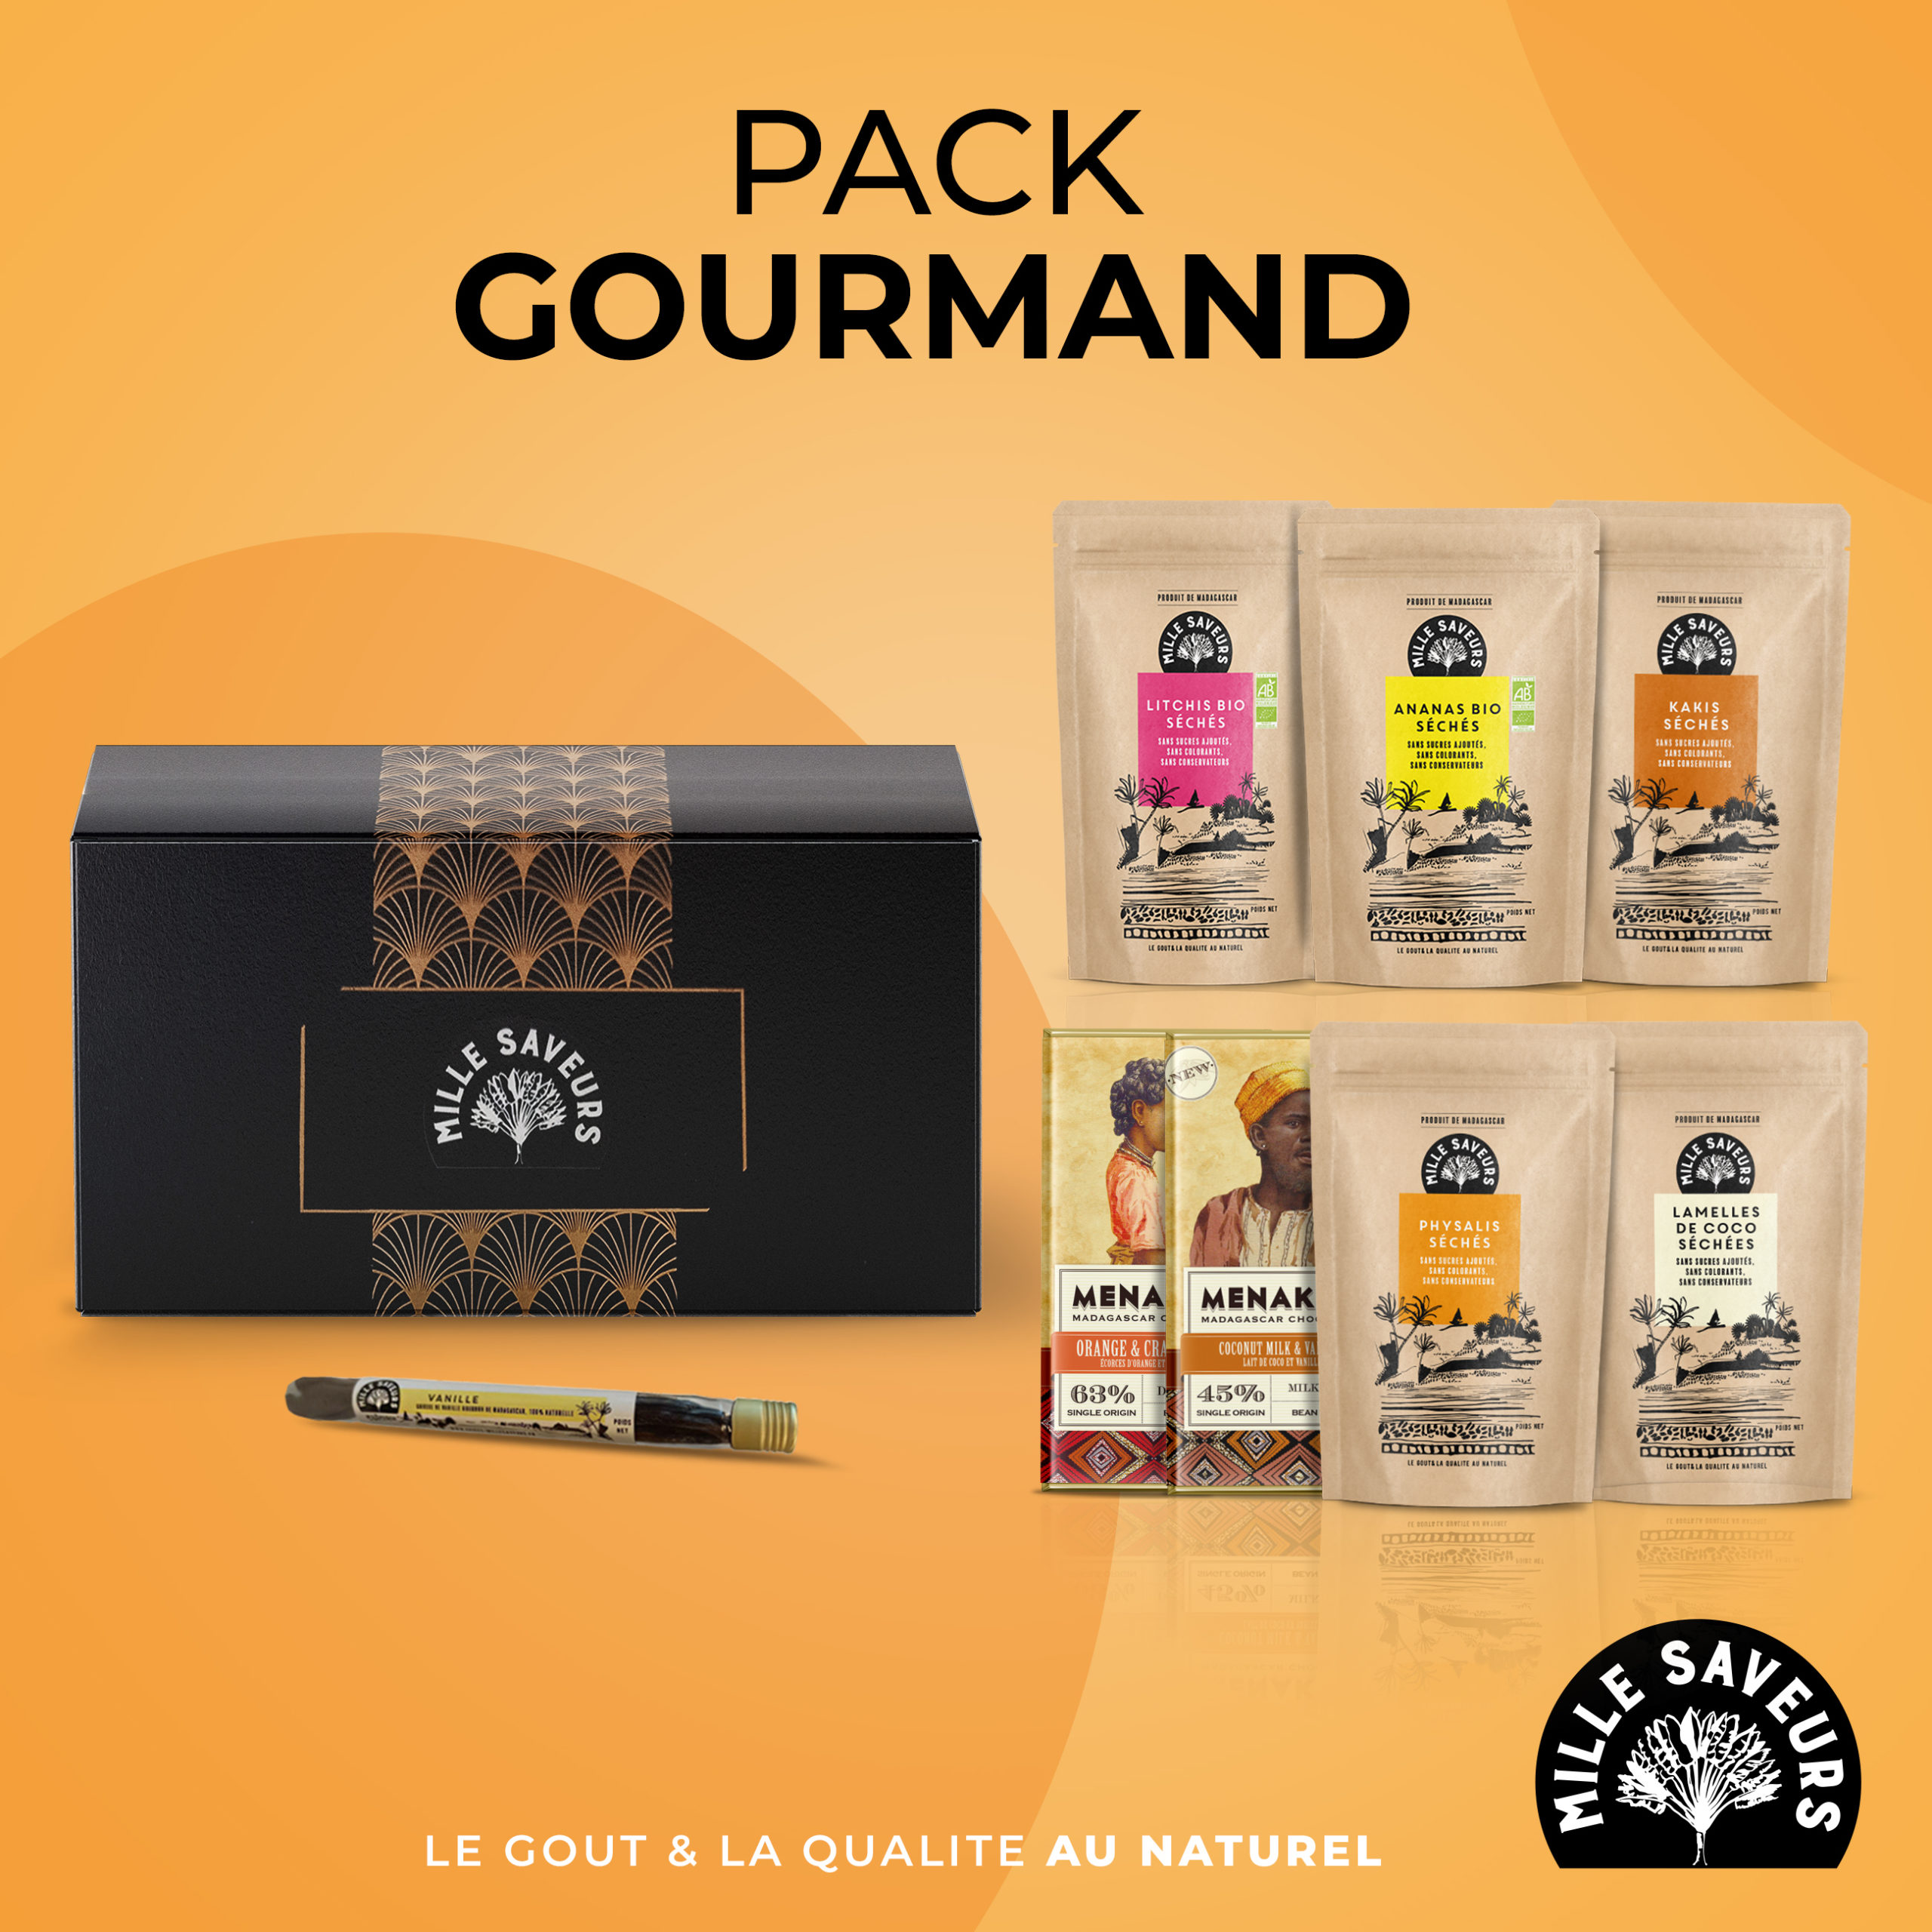 Mille Saveurs Pack Gourmand 002 1 scaled - Epices Mille Saveurs